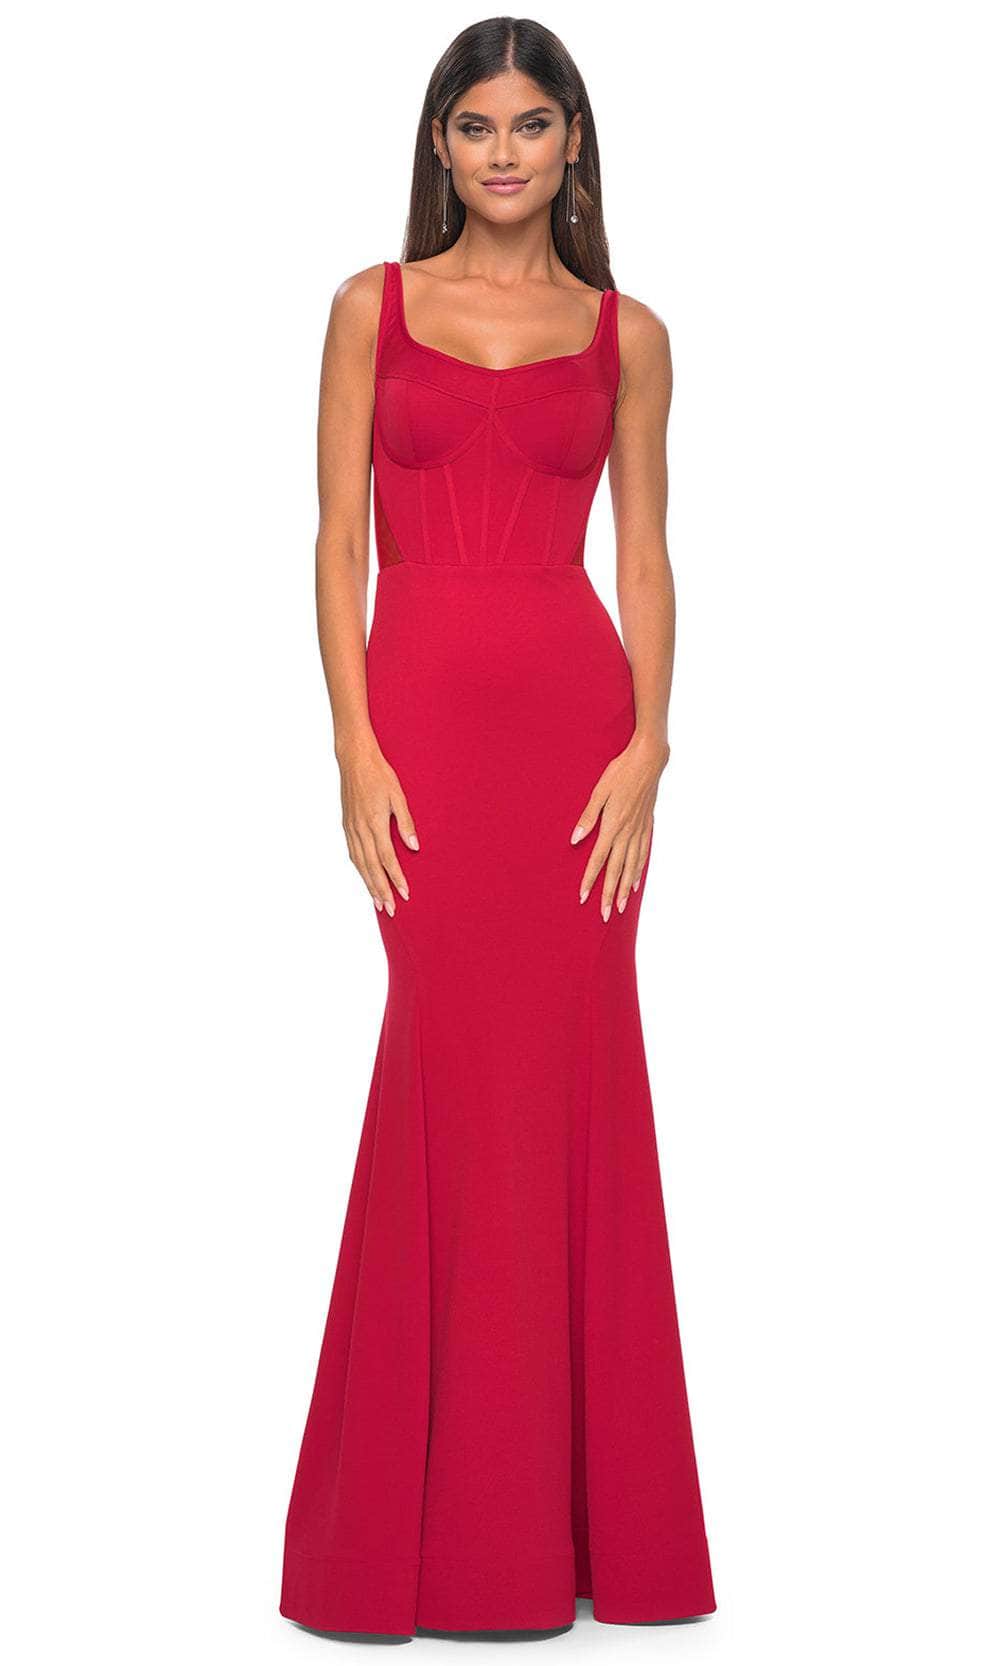 La Femme 32268 - Sheer Scoop Back Prom Gown Formal Gowns 00 / Red